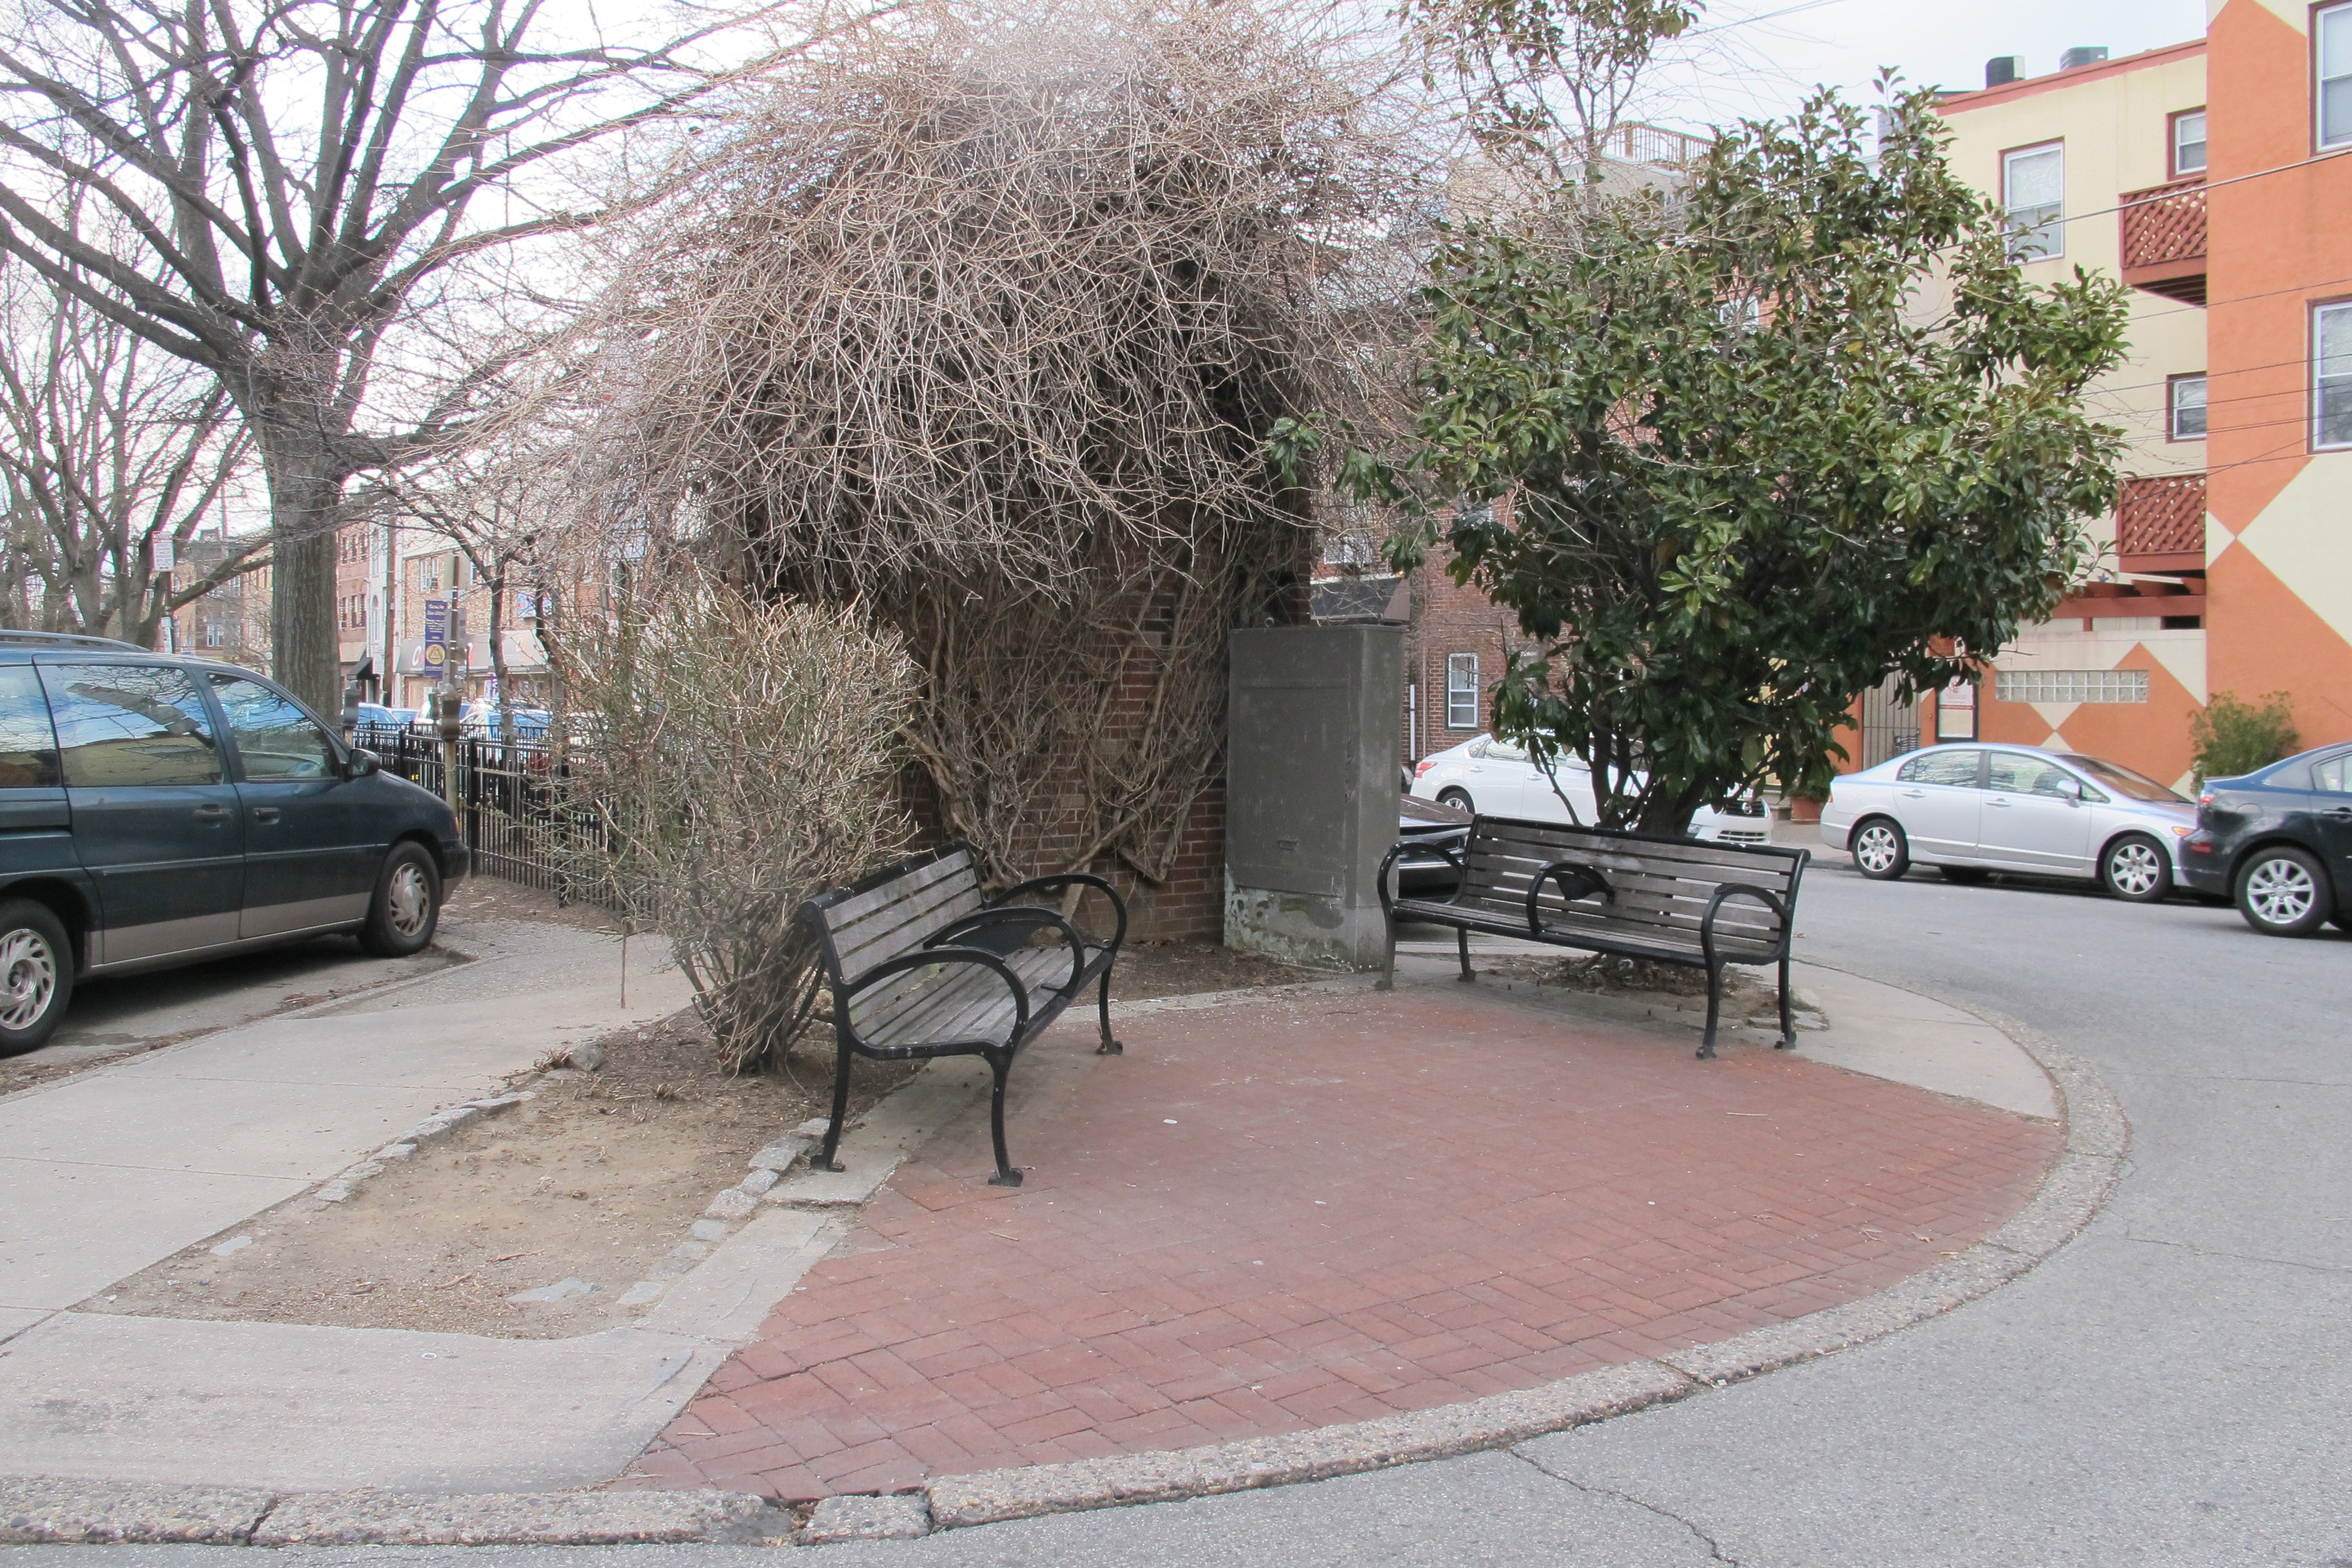 The tired, oddly shaped plaza at 3rd Street features an overgrown brick wall that once had a veterans memorial on it.